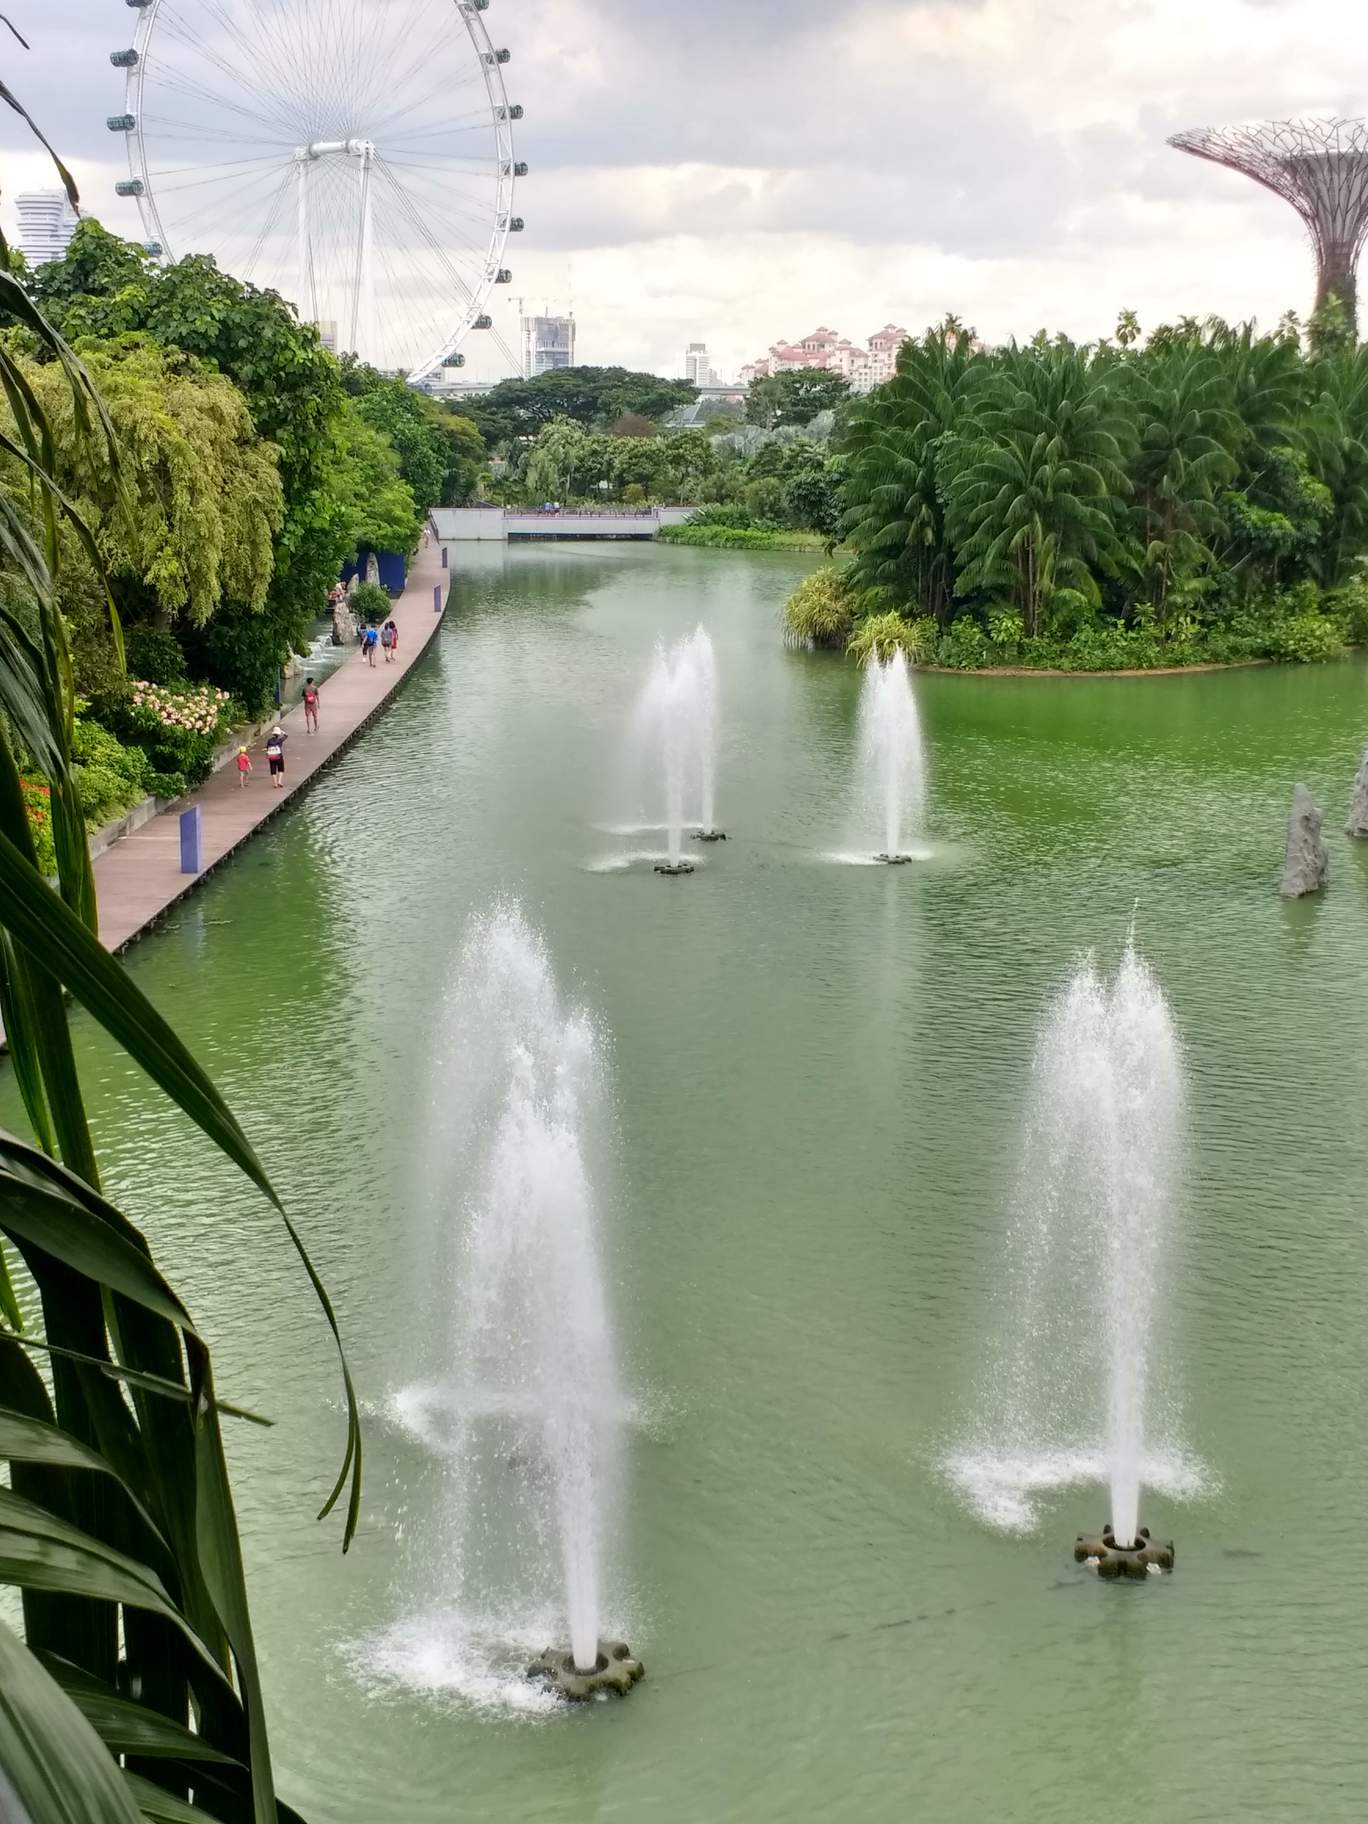 View of fountains at Gardens by the Bay.